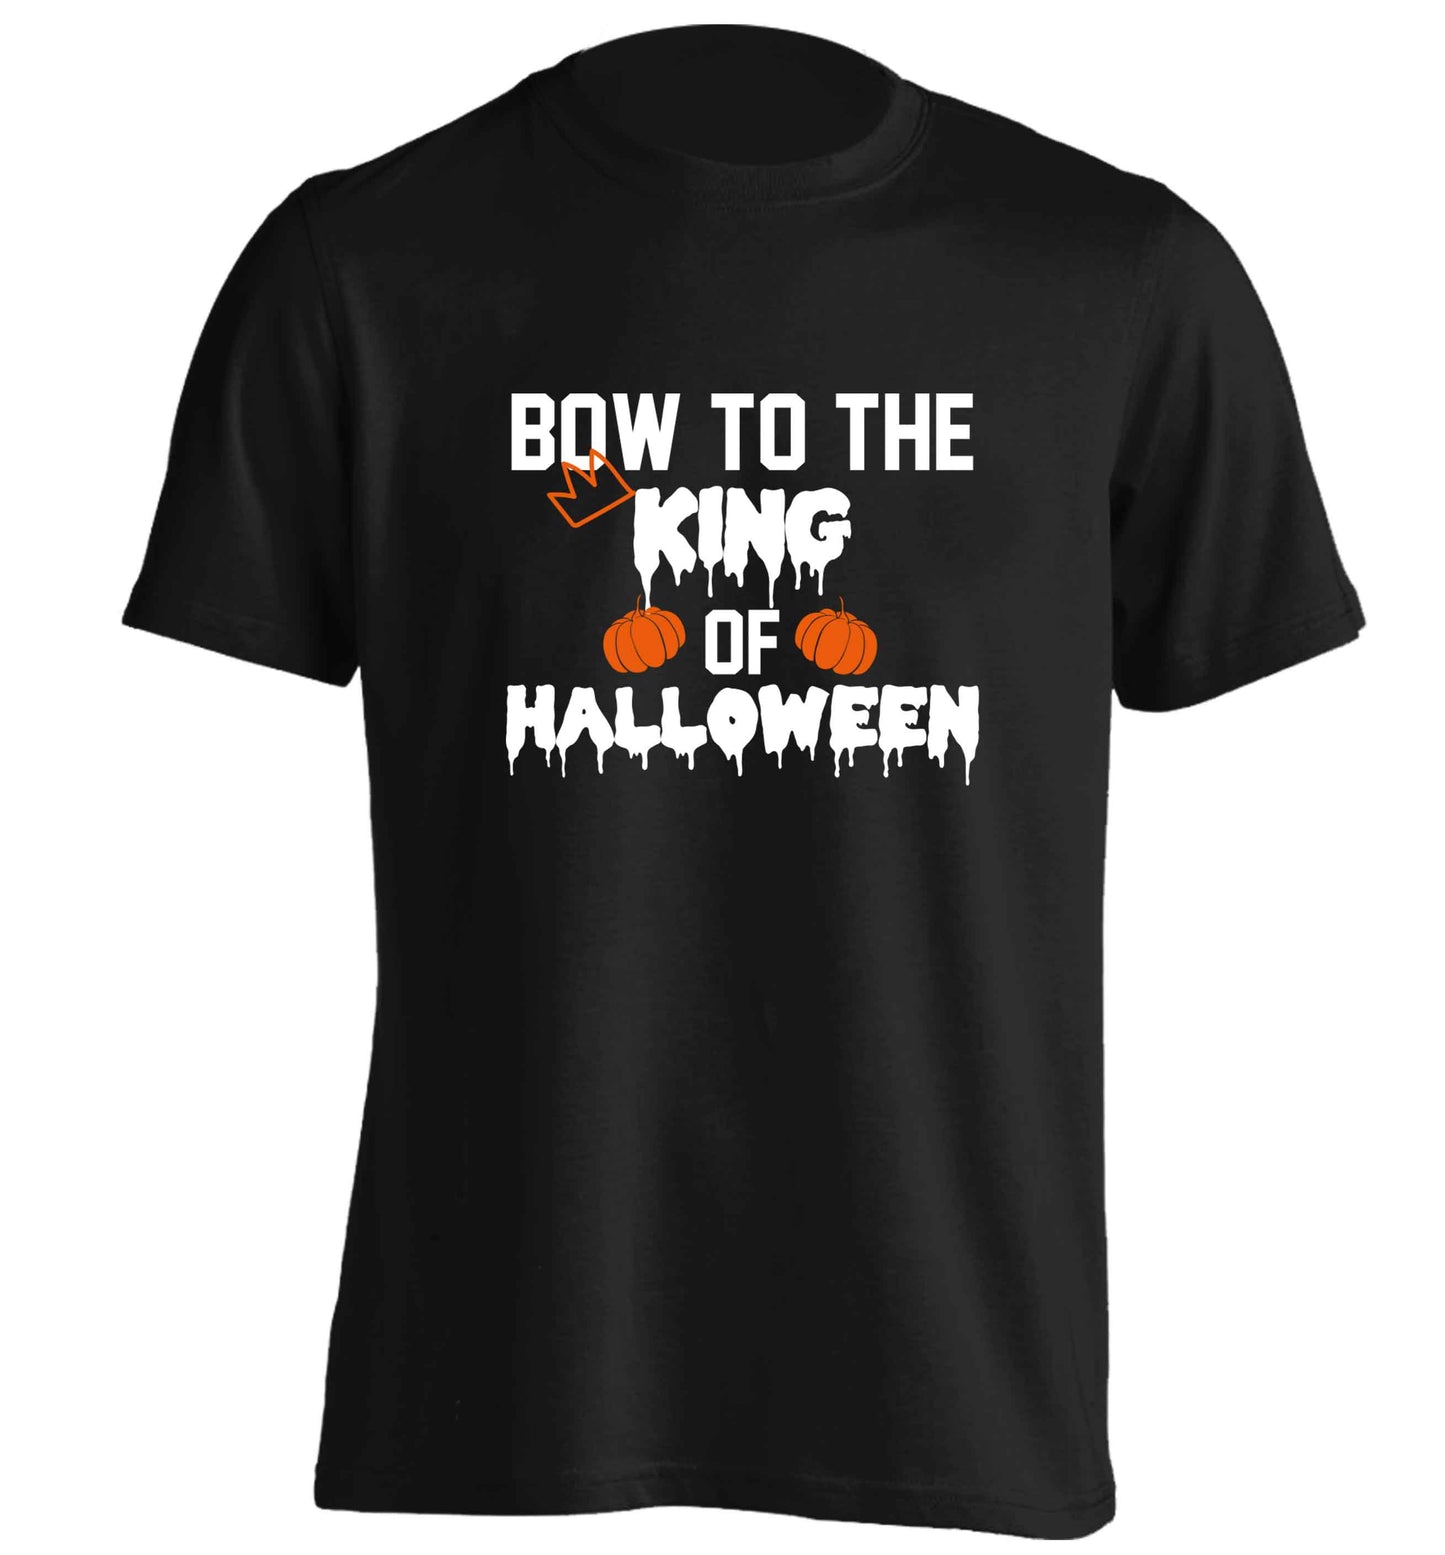 Bow to the King of halloween adults unisex black Tshirt 2XL